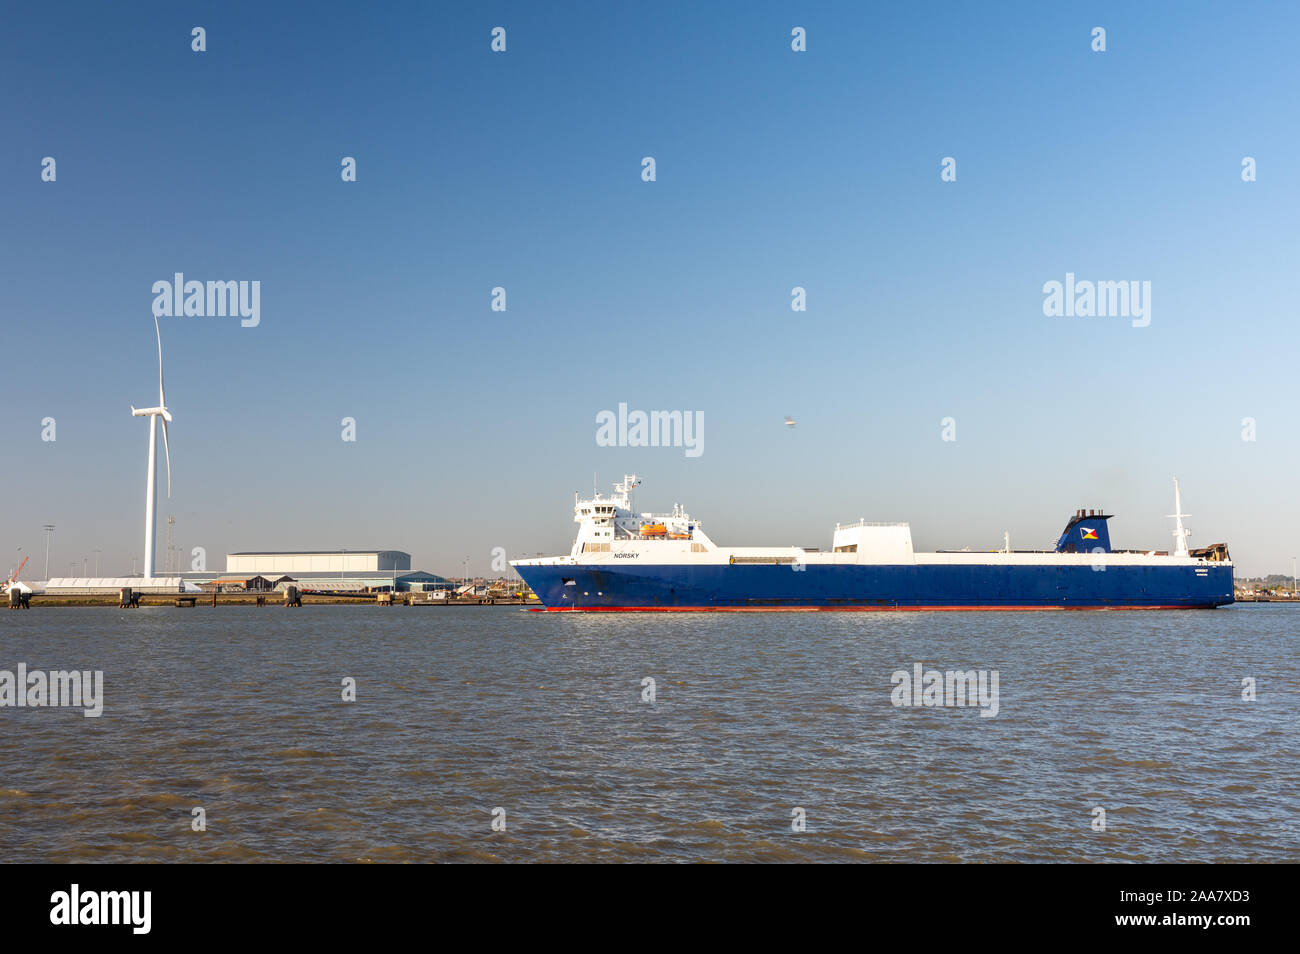 Gravesend, England, UK - September 21, 2010: A roll on-roll off cargo ferry sails on the Thames Estuary at Tilbury Docks in Essex. Stock Photo